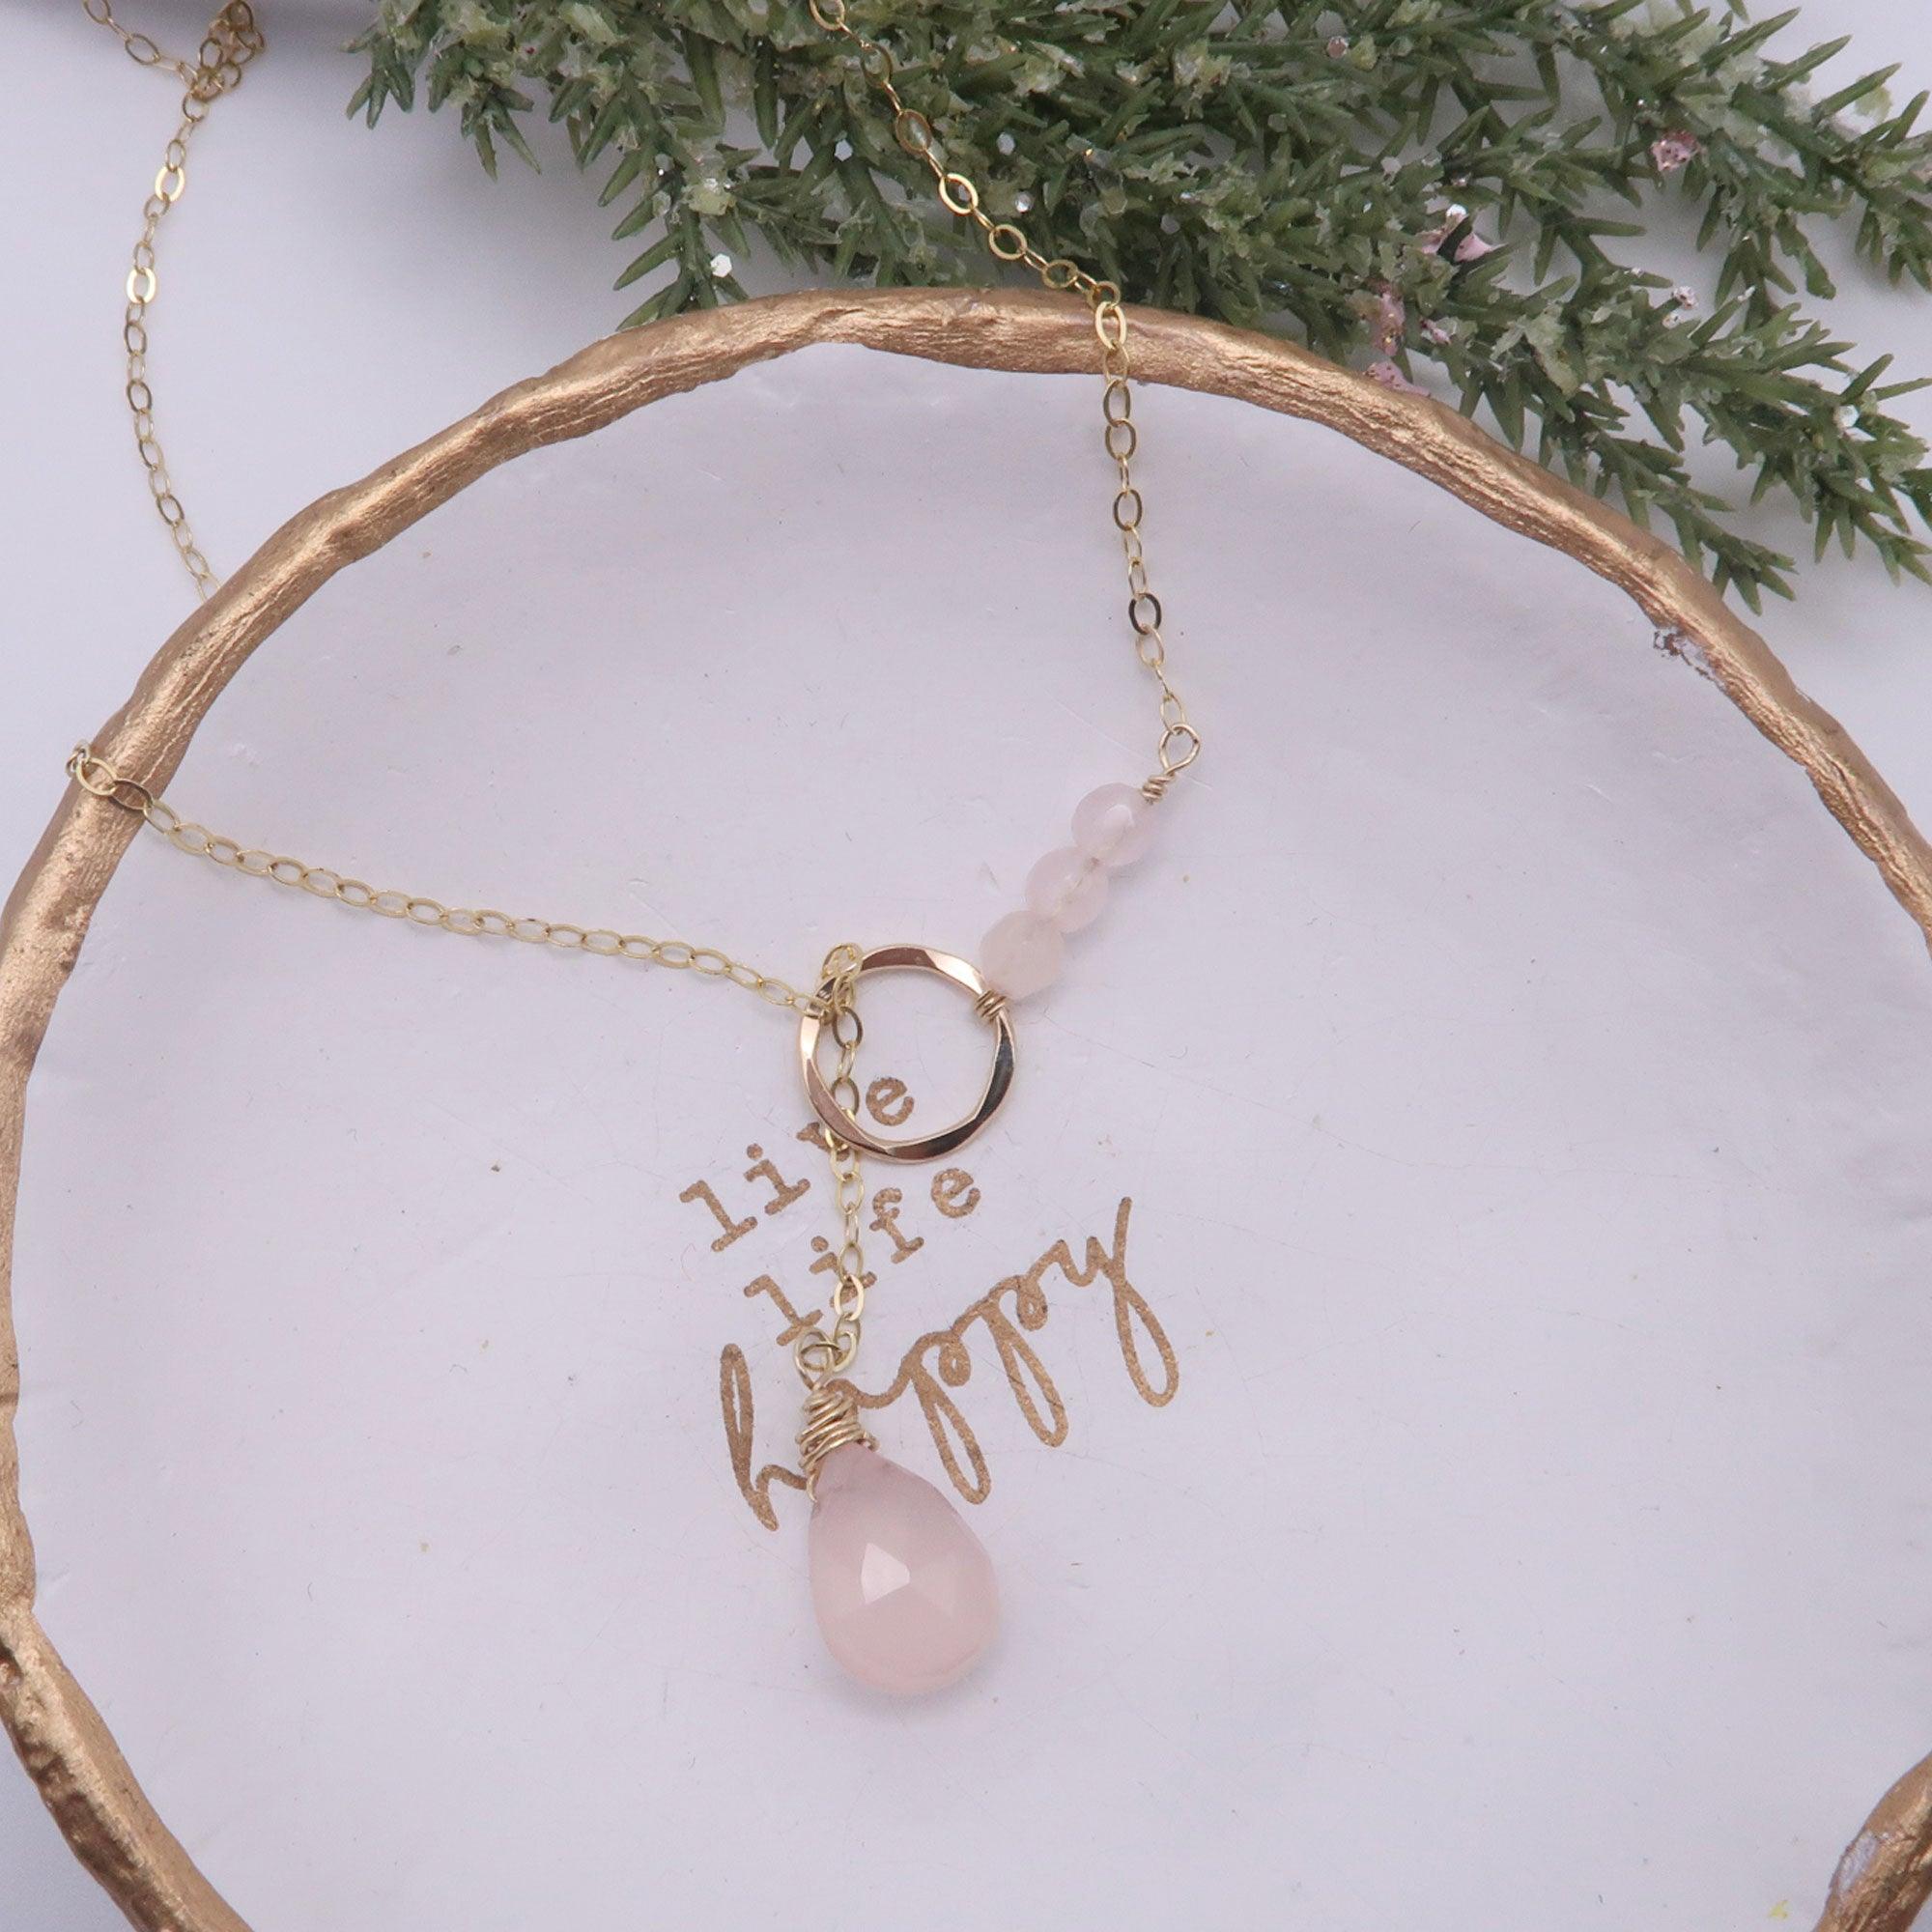 Rose Quartz 14k Gold Filled Necklace. Heart Chakra Healing necklace to help welcome new love. 